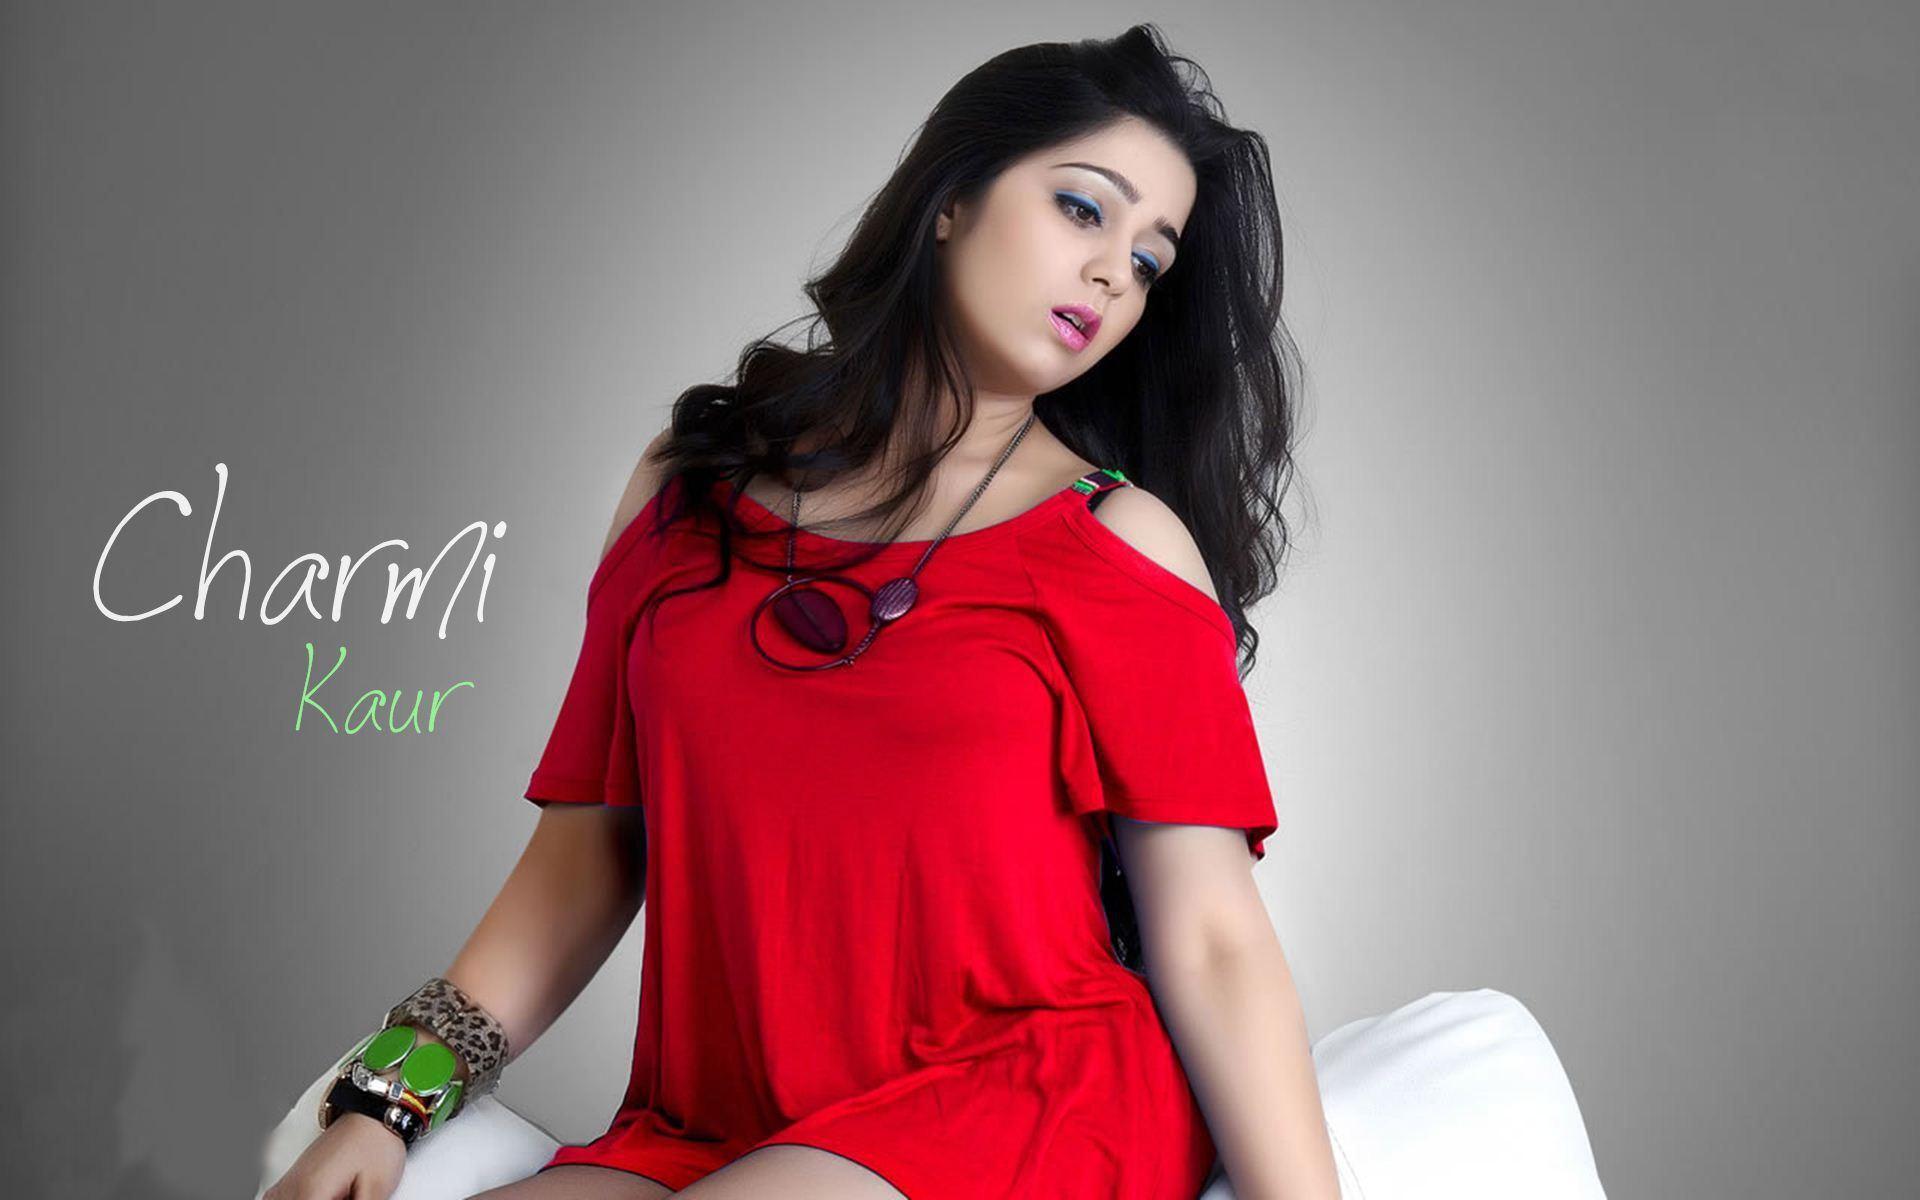 South Indian Actress Wallpapers South Indian Actress - Charmi Kaur In Hd - HD Wallpaper 